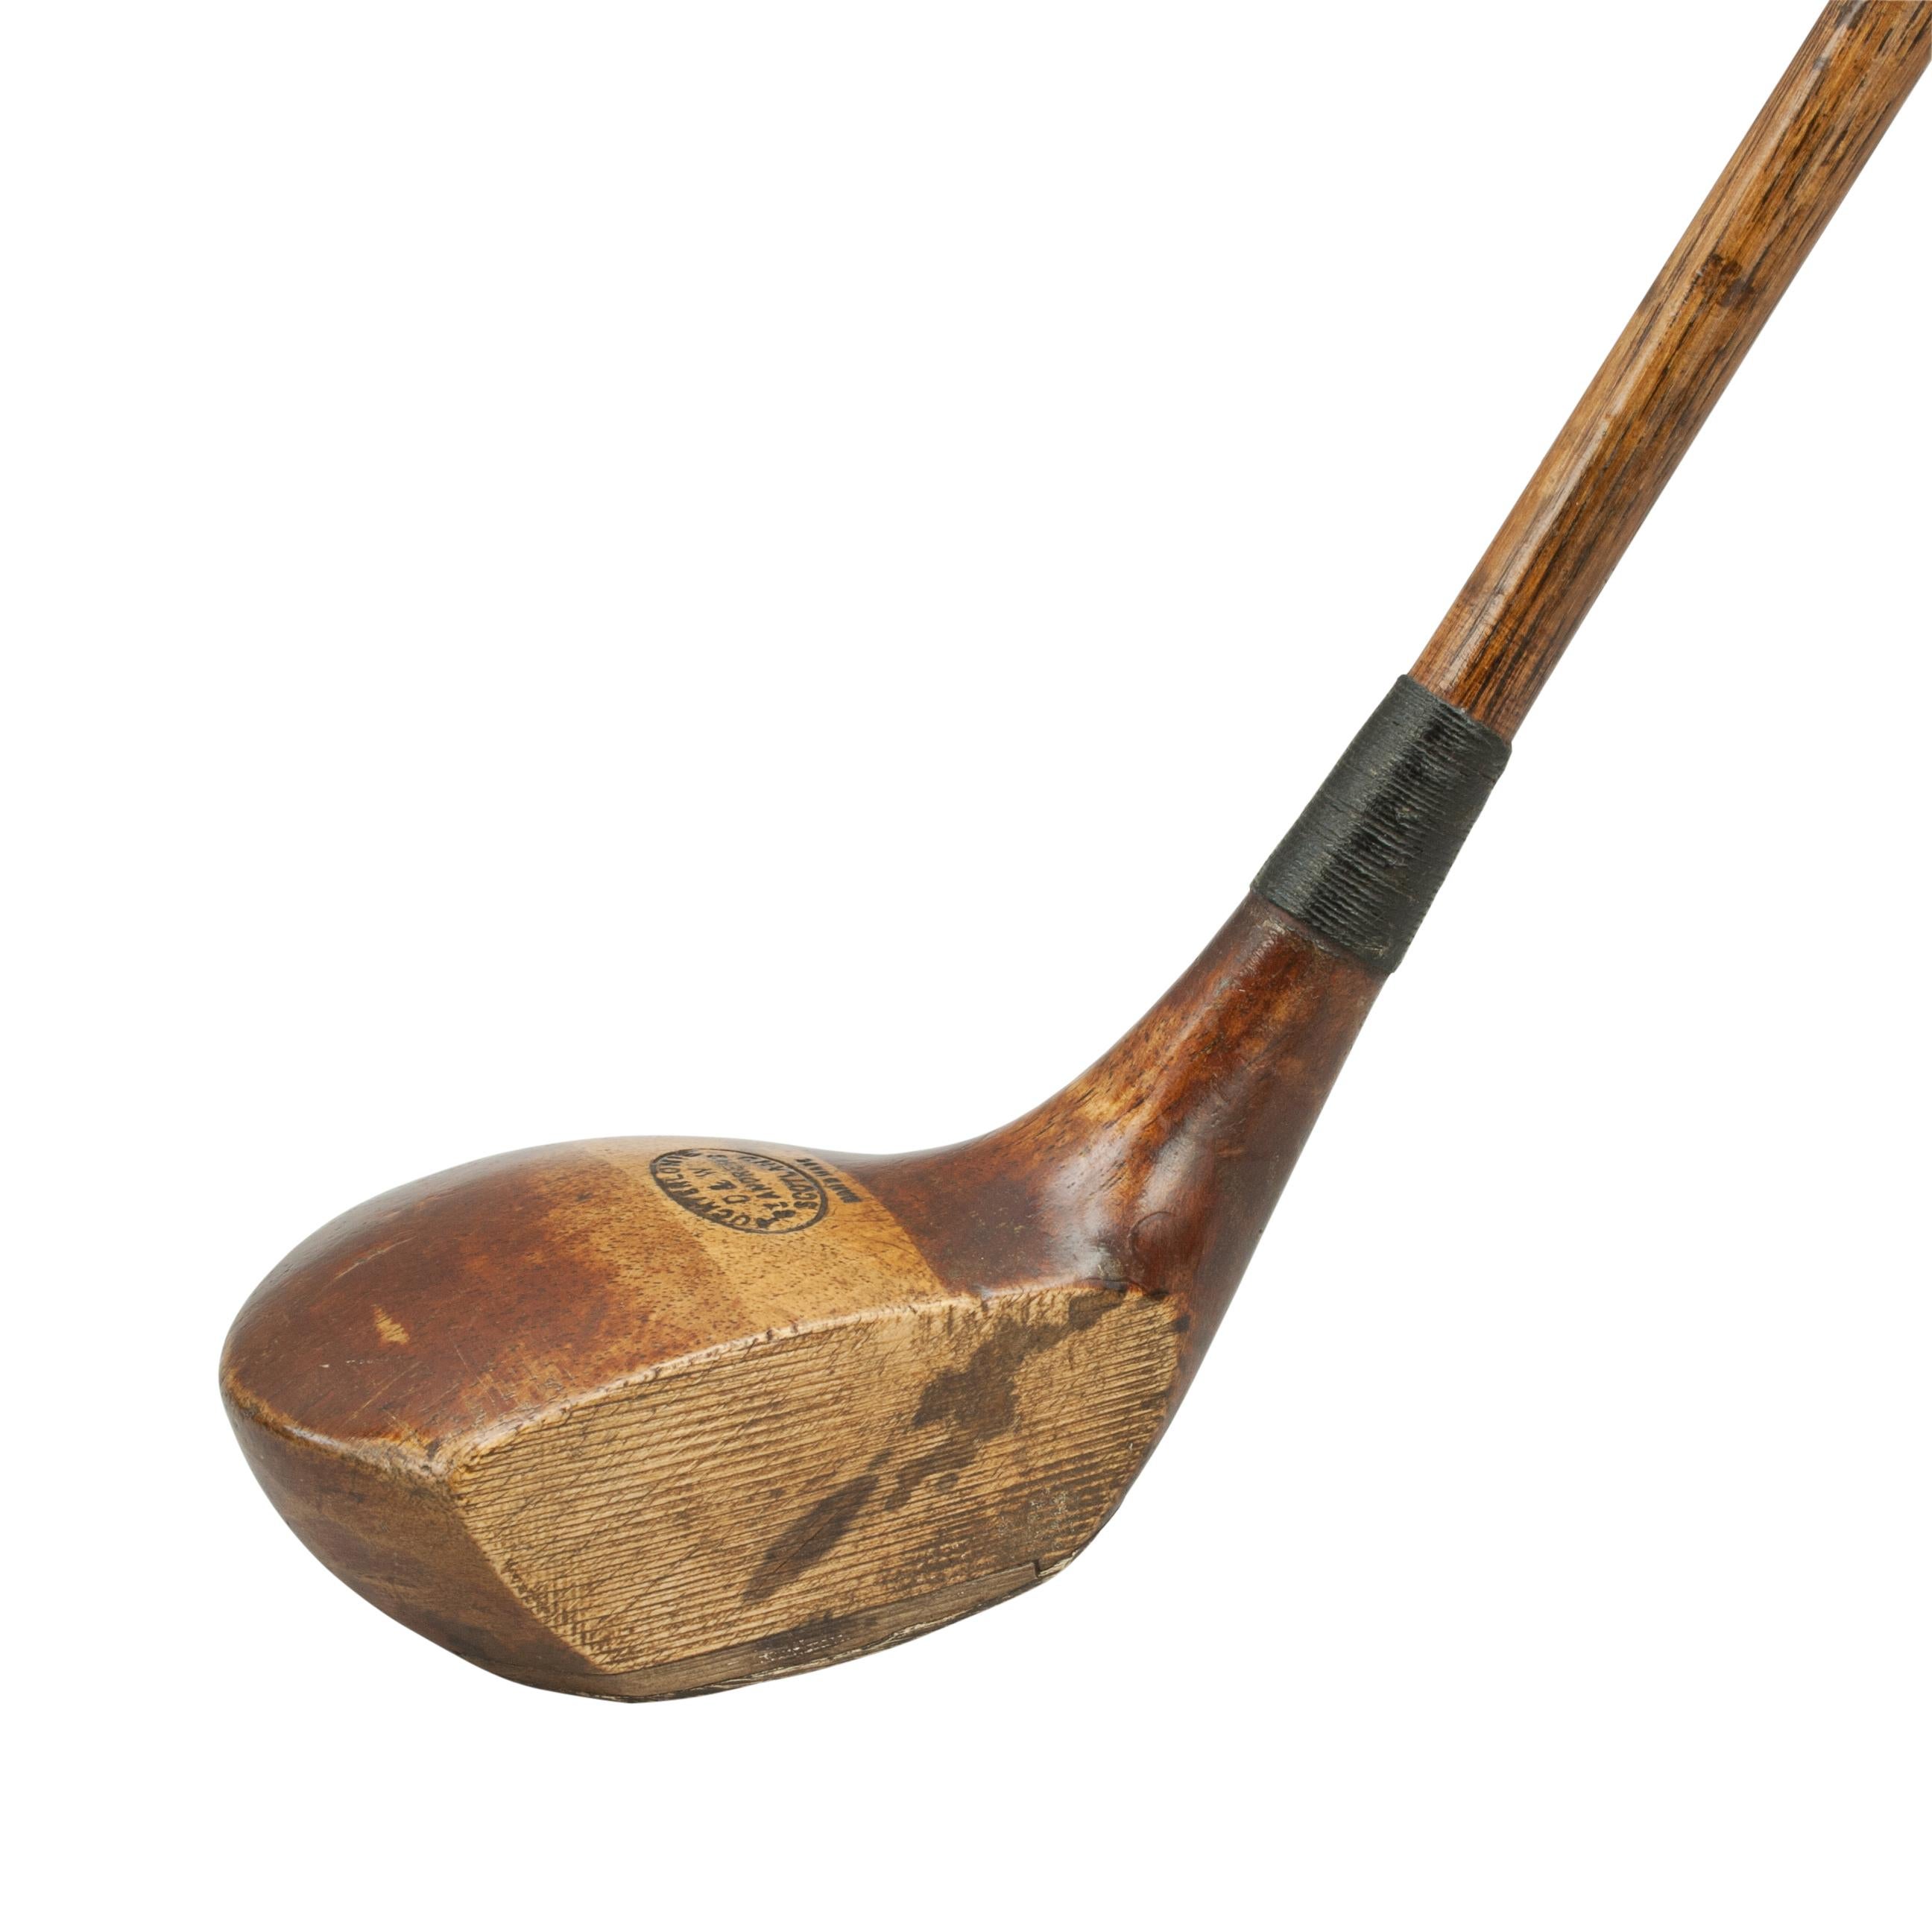 A good original persimmon wood golf club, driver by Auchterlonie of St Andrews. The club head is stamped 'D. & W. Auchterlonie, Scotland, handmade'. The head with lead weight to the rear with a Horn sole insert on the leading edge and partial brass